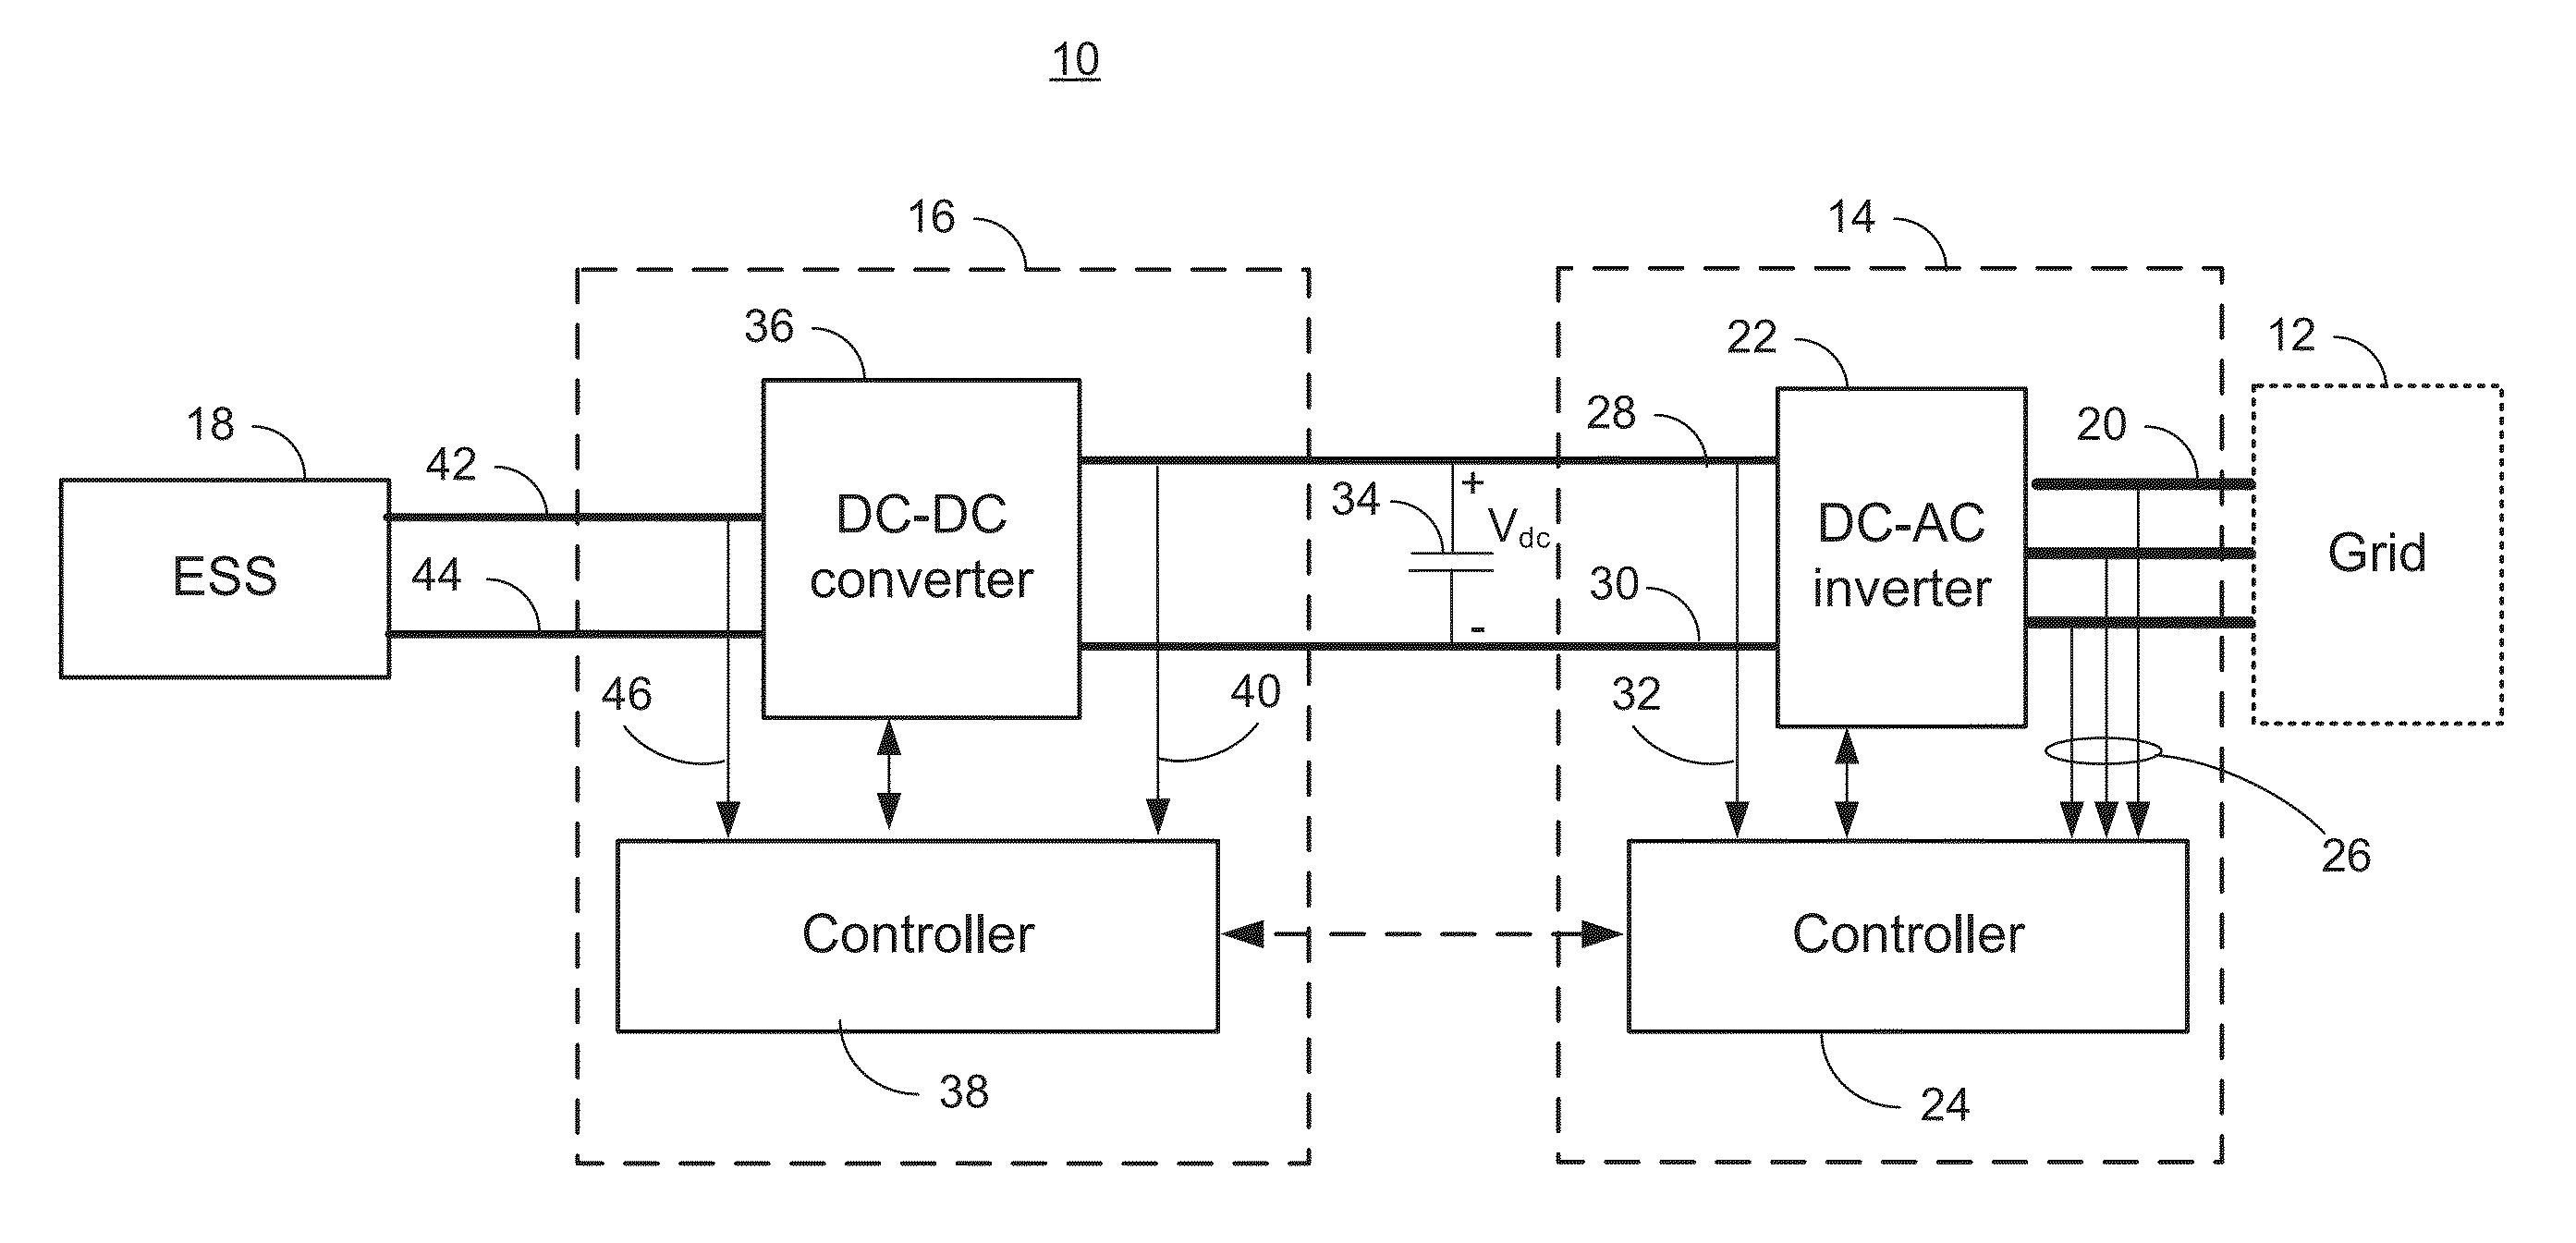 Control of Energy Storage System Inverter System in a Microgrid Application